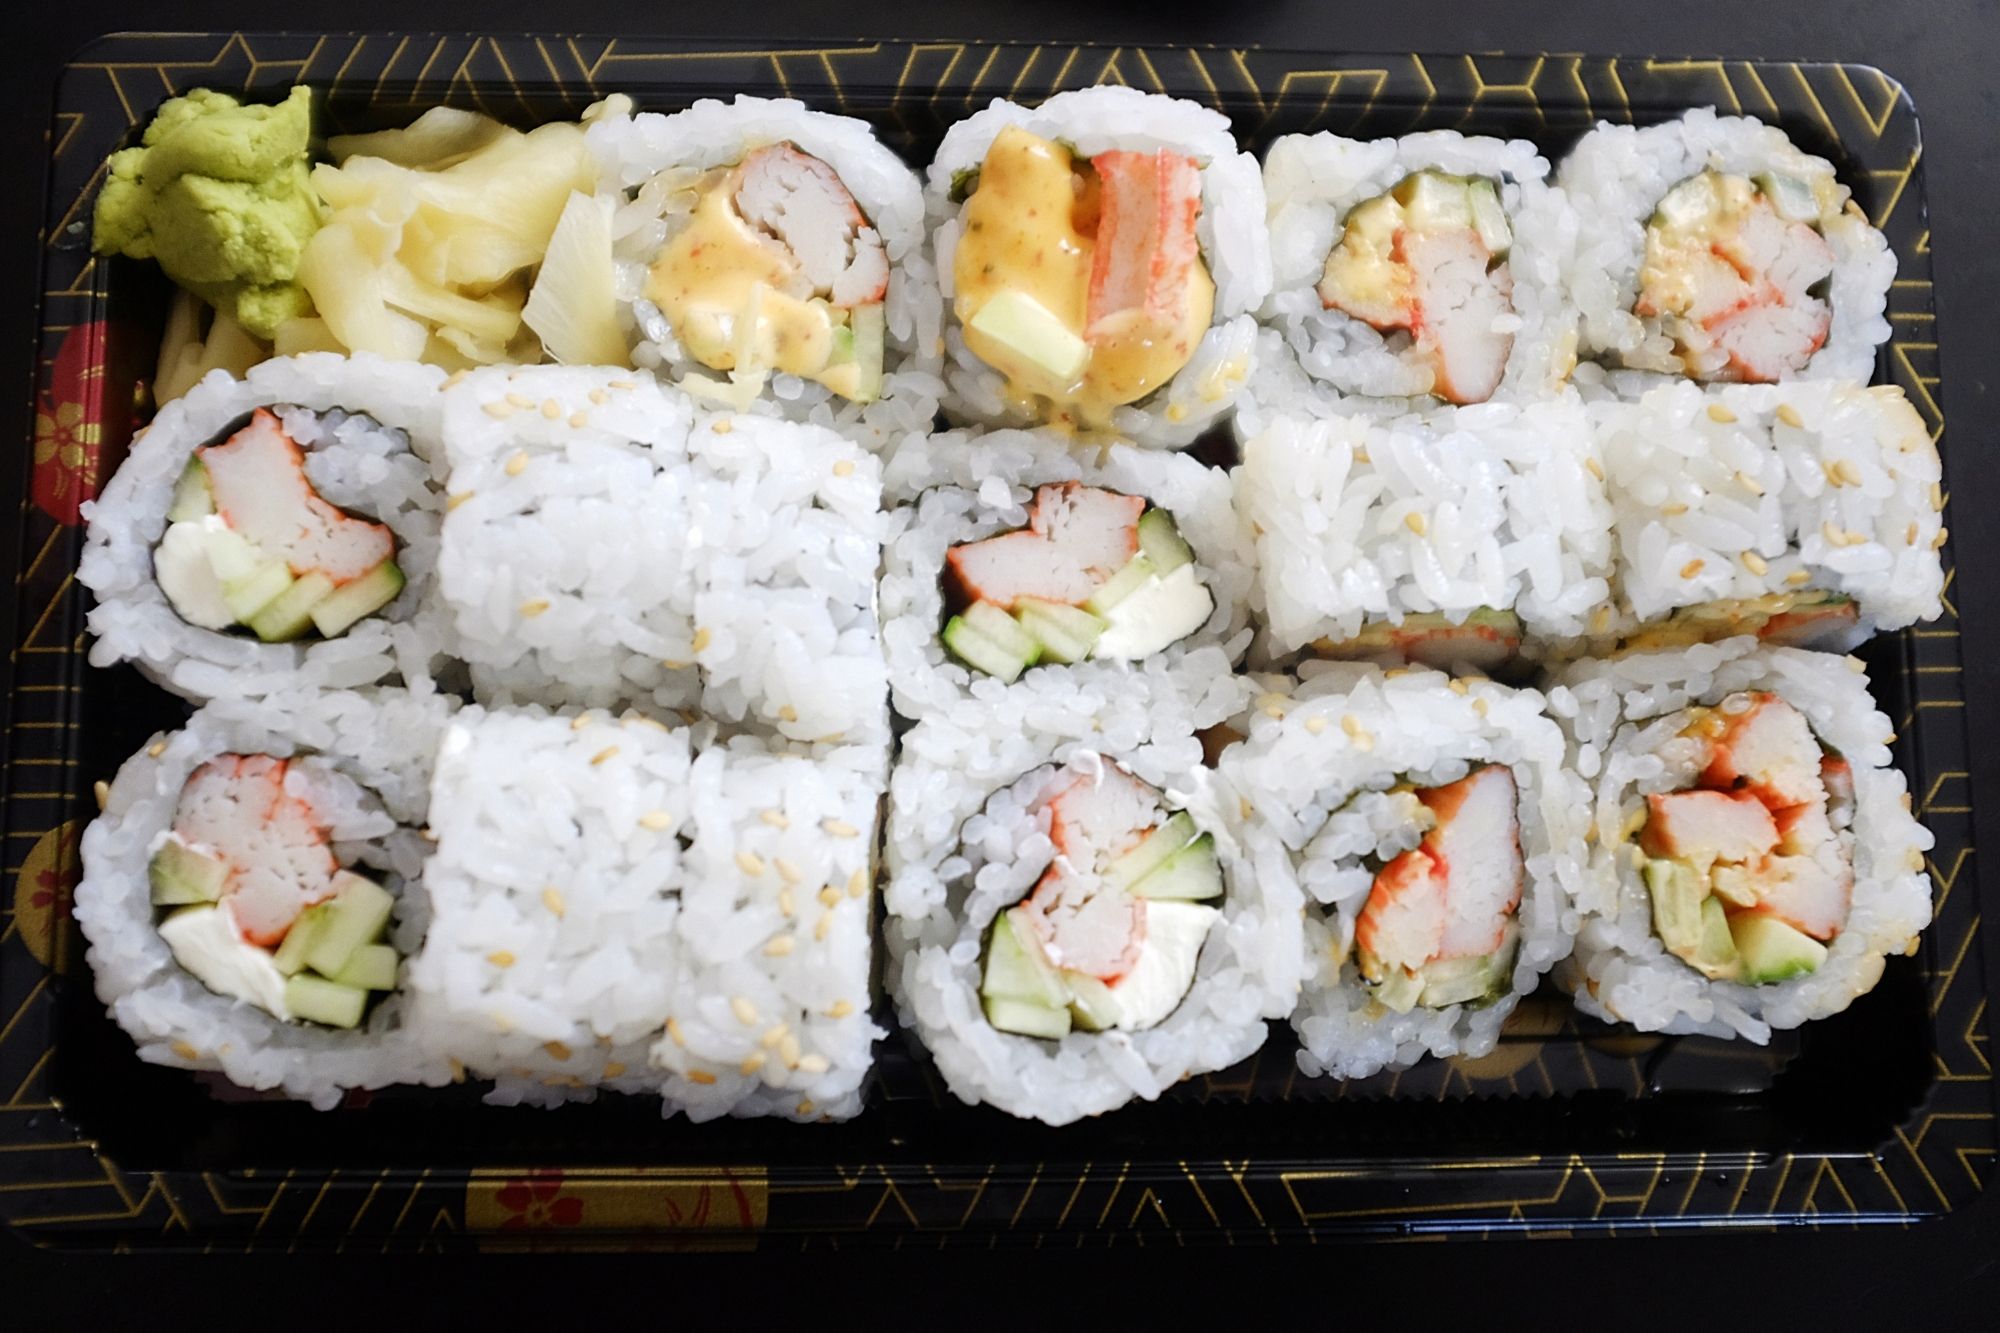 Twelve pieces of sushi in a takeout box